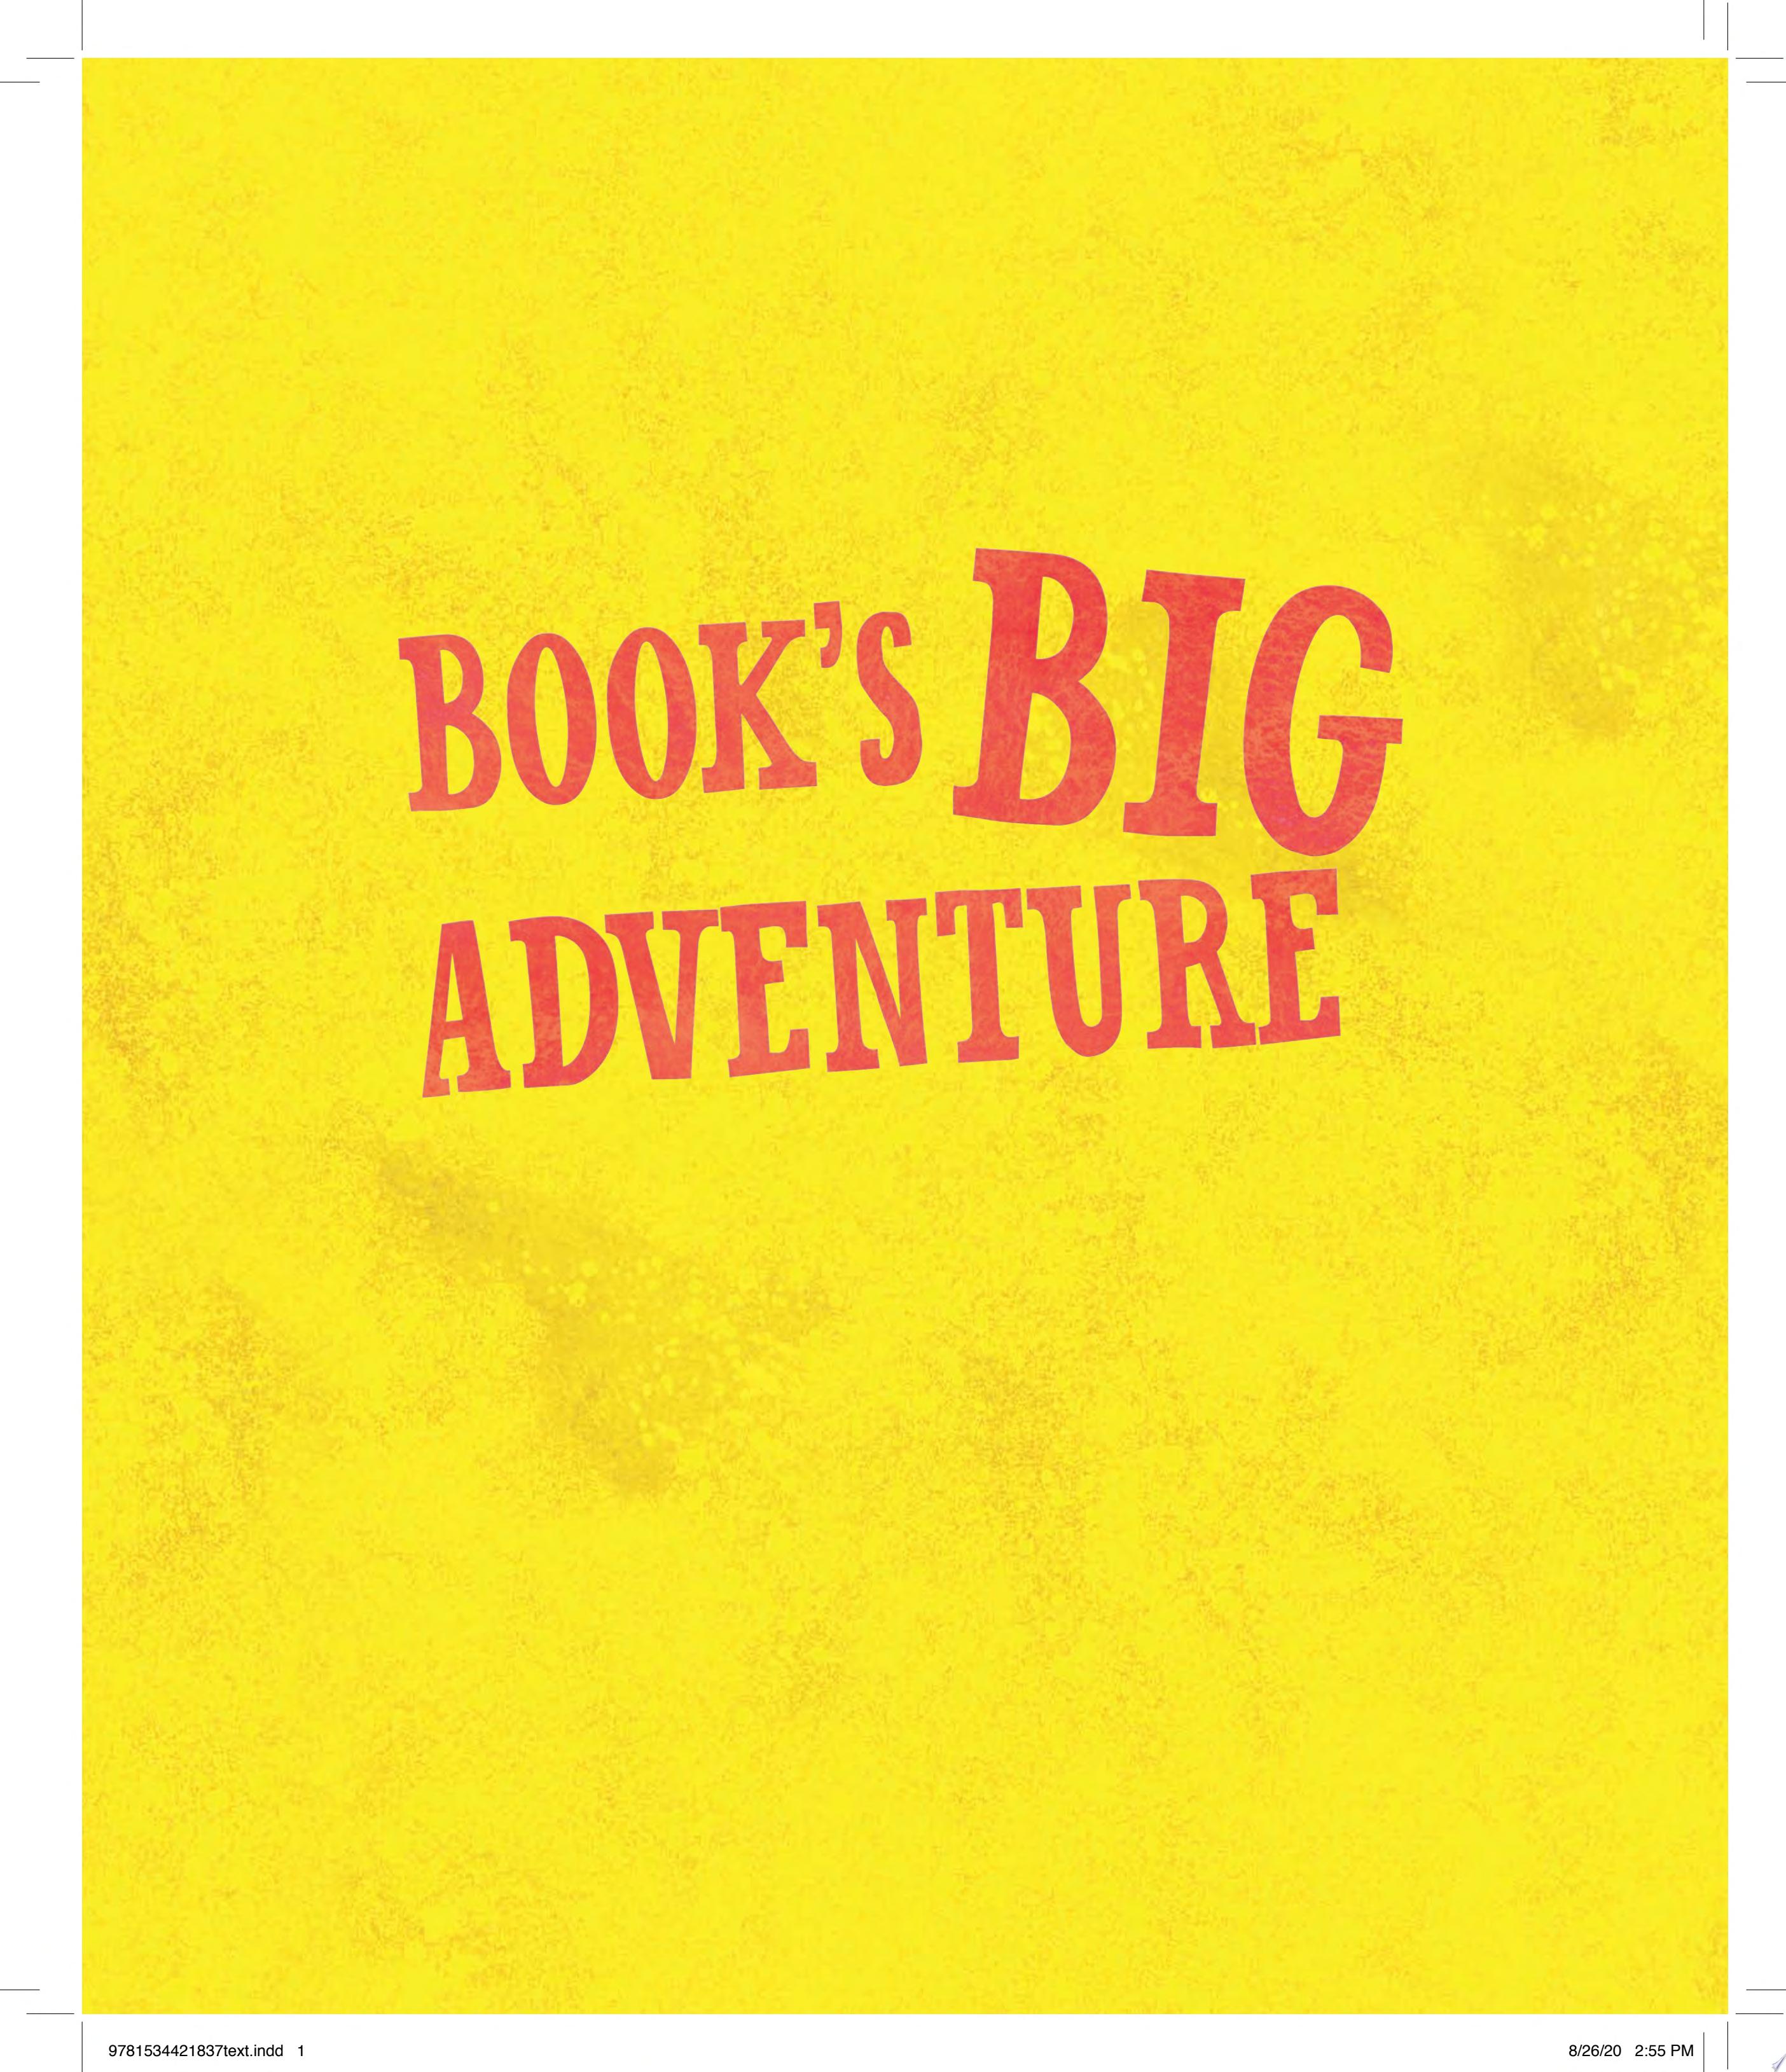 Image for "Book's Big Adventure"